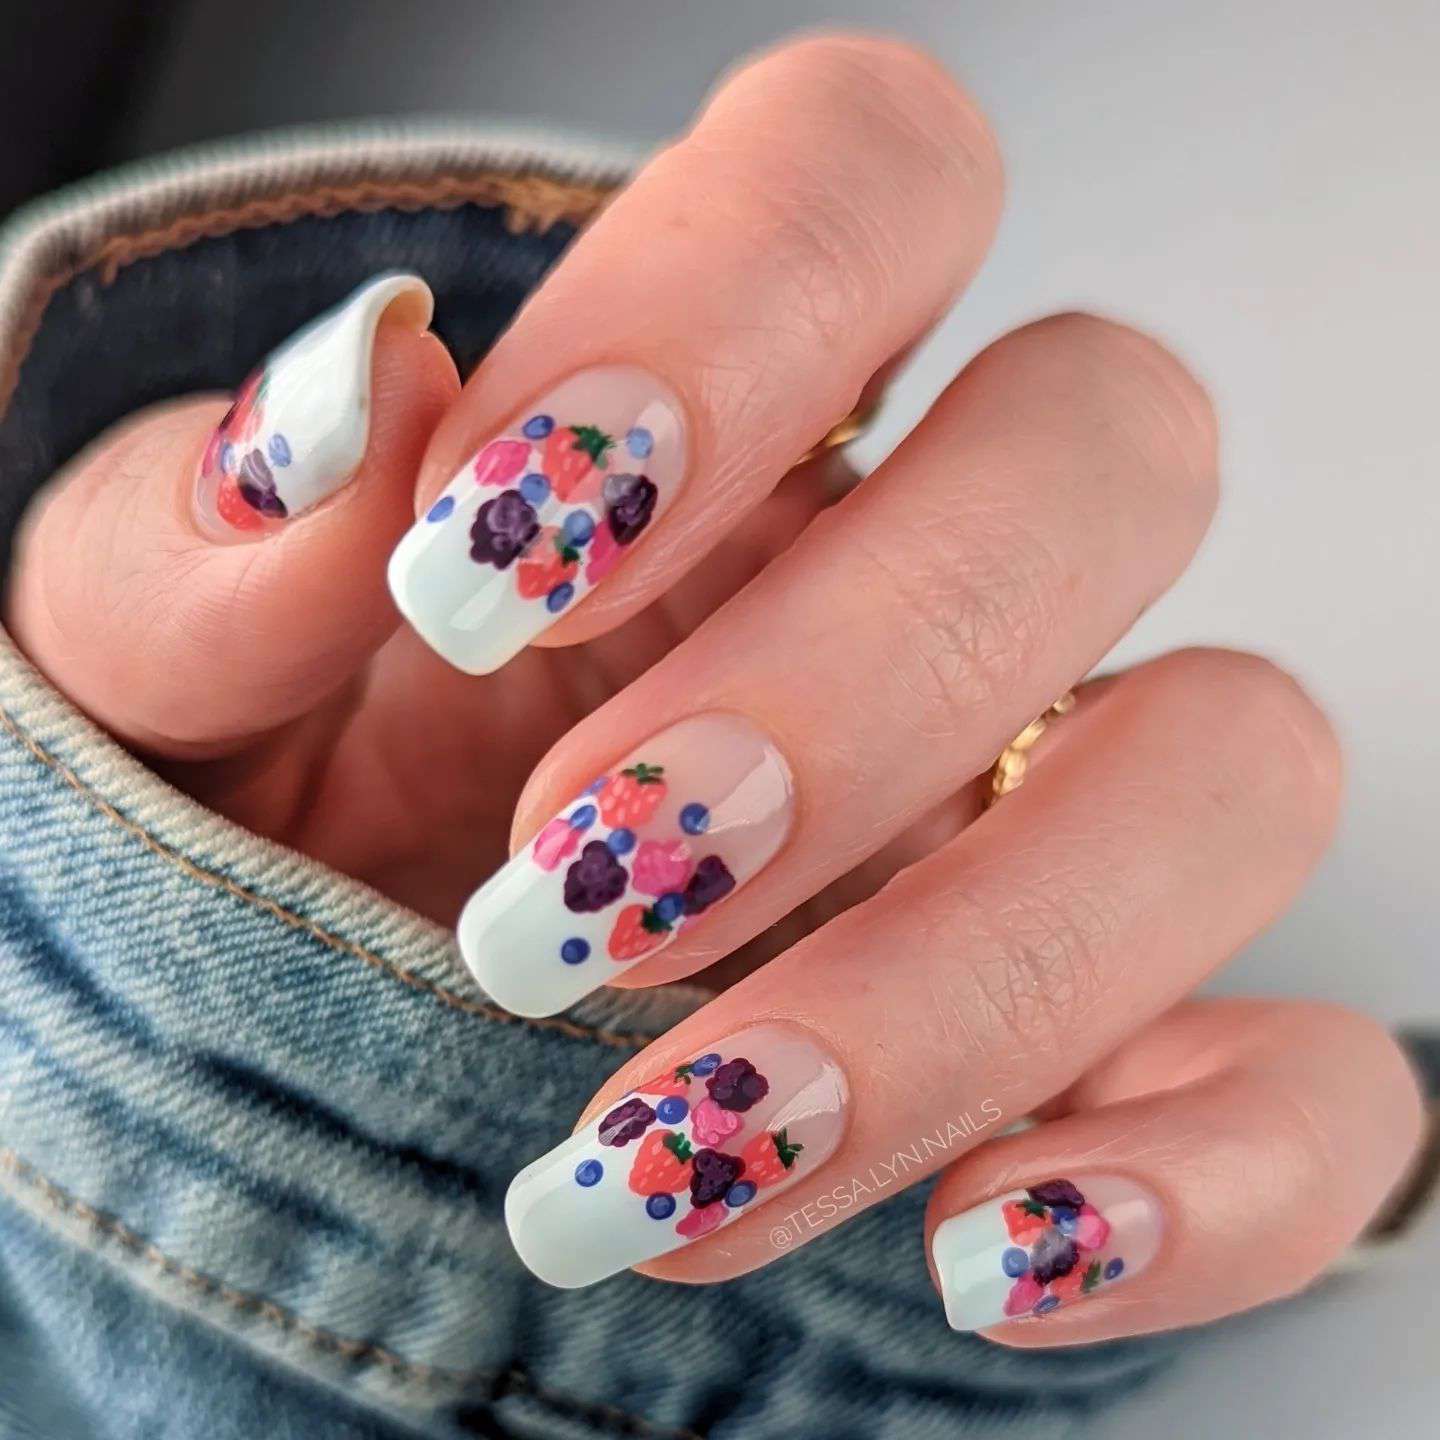 100+ Prettiest Fall Nail Designs And Ideas To Try In 2022 images 79